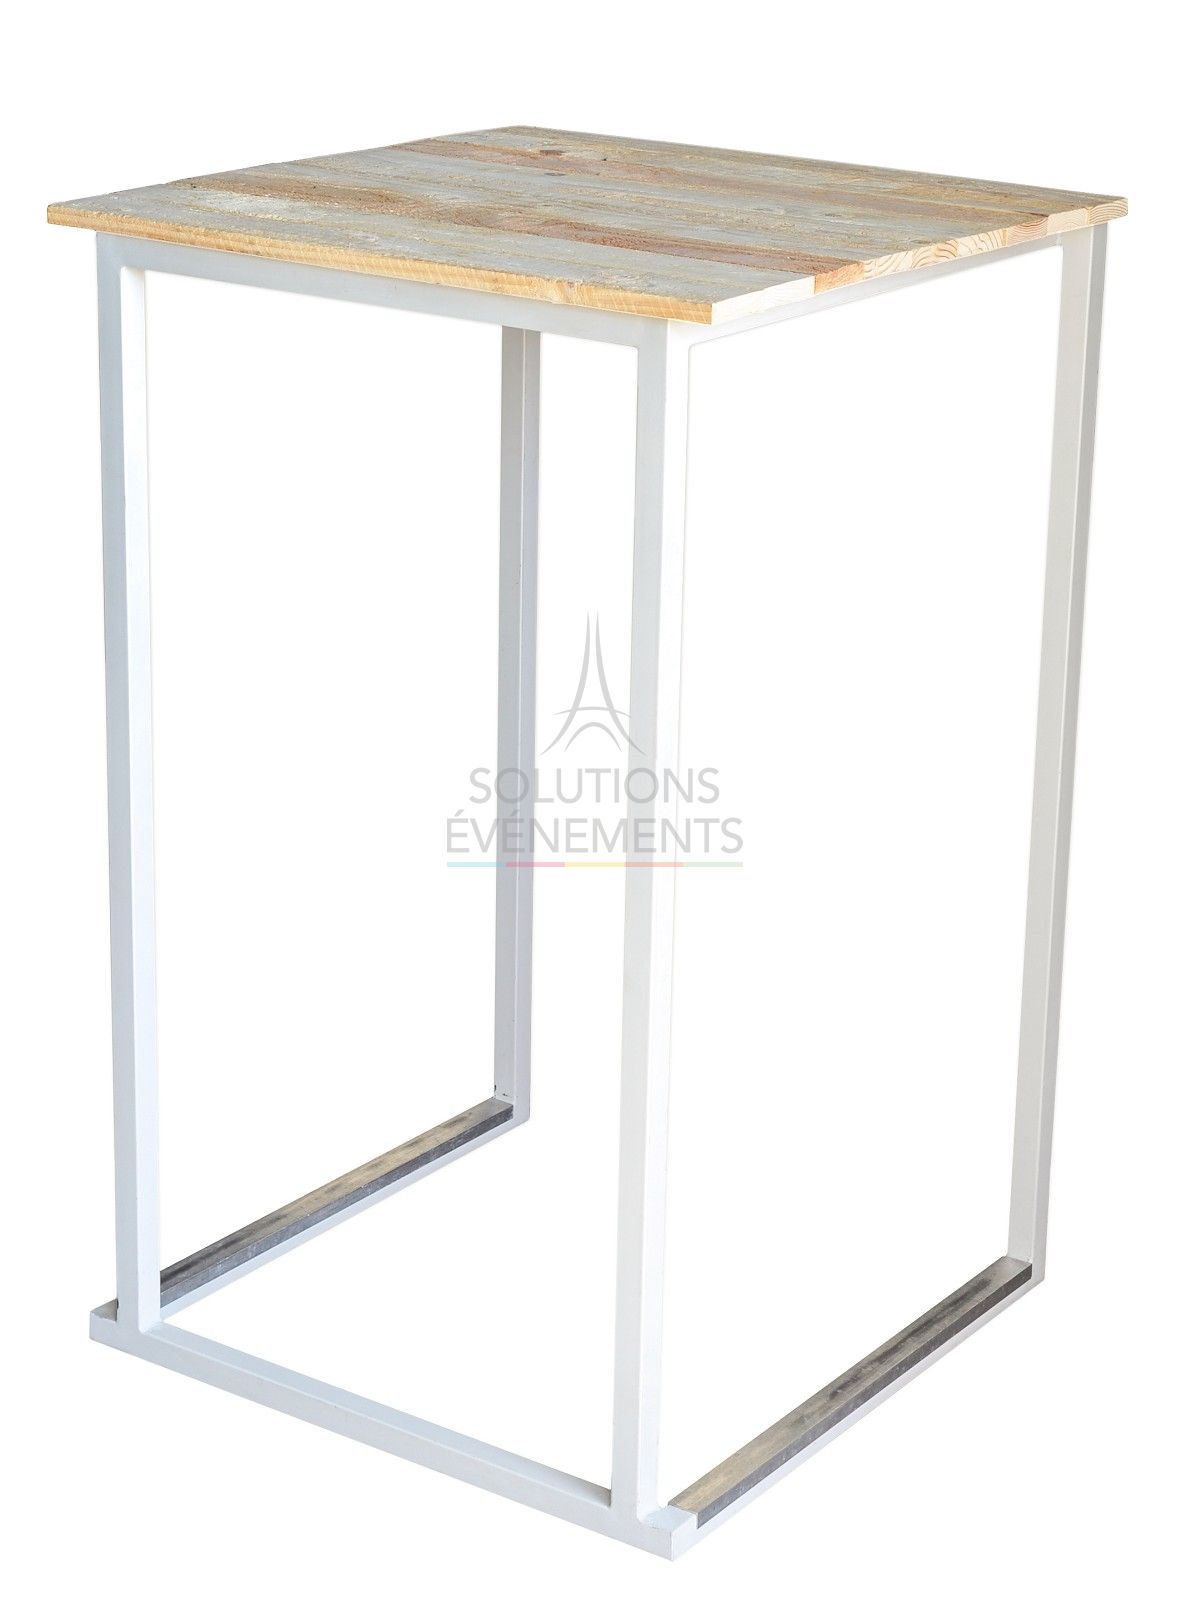 Rental of eco-responsible pallet wood standing tables